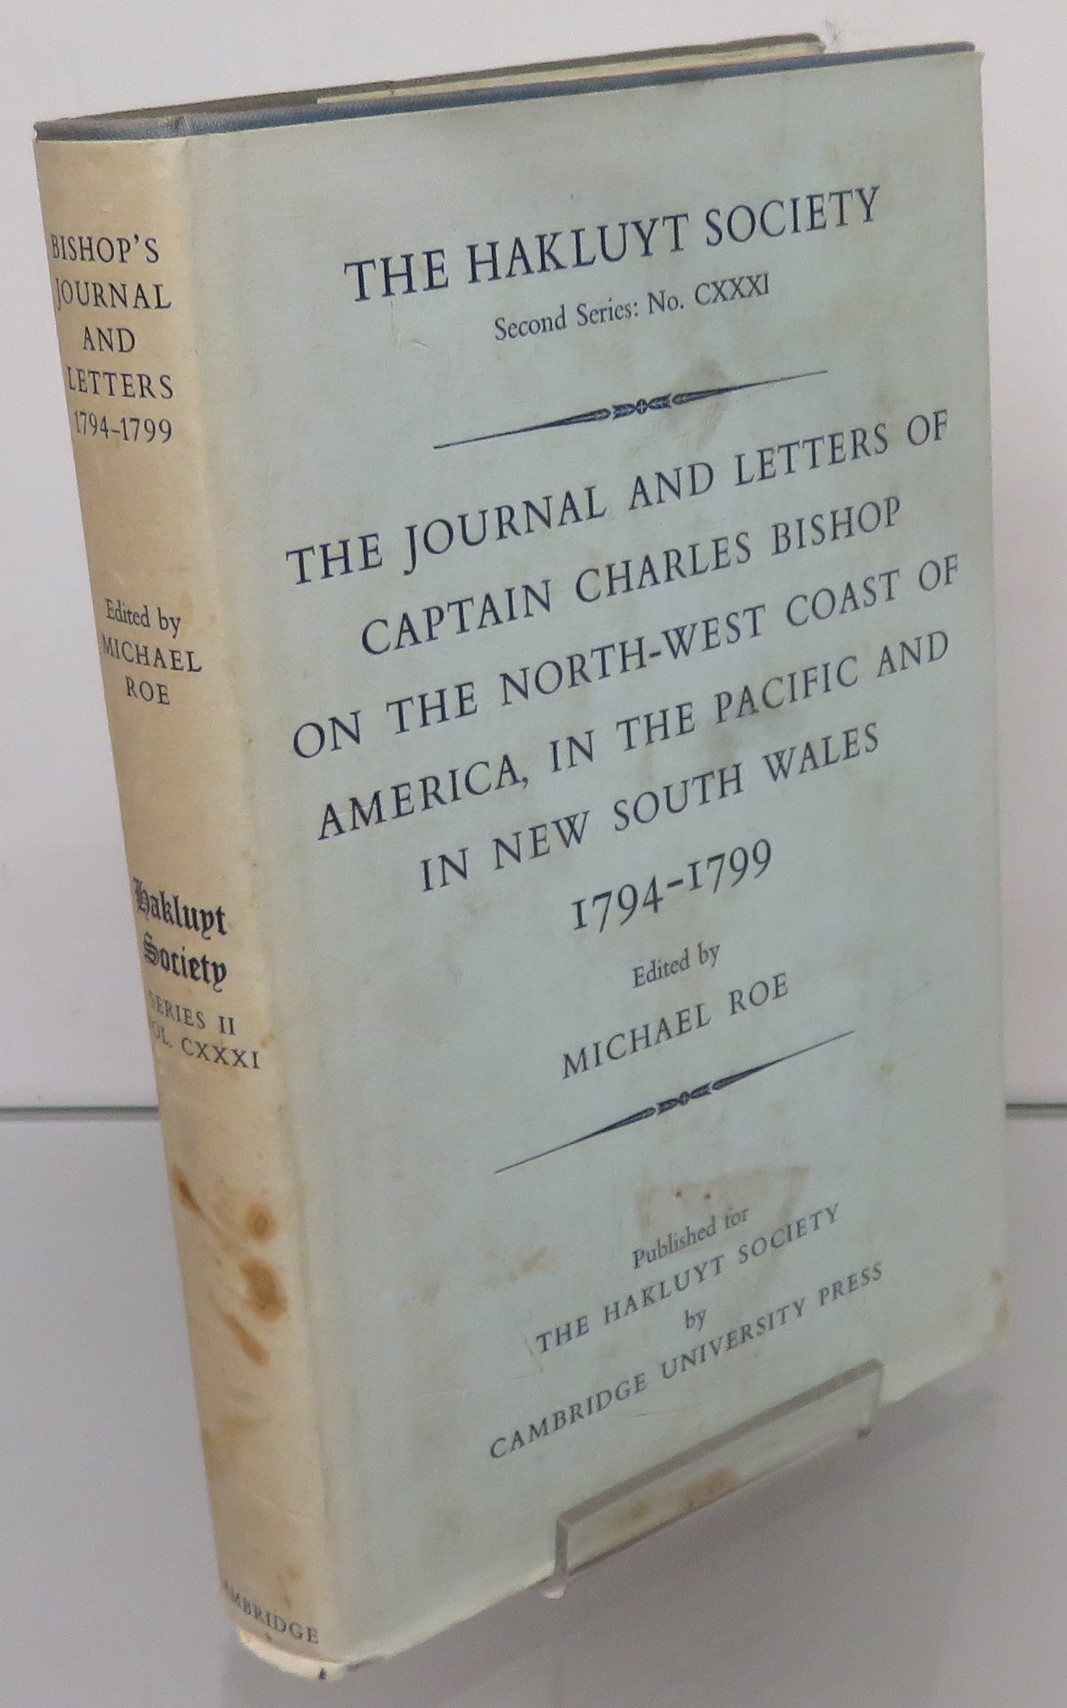 The Journal and Letters of Captain Charles Bishop on the North-West Coast of America, in the Pacific and in New South Wales 1794-1799